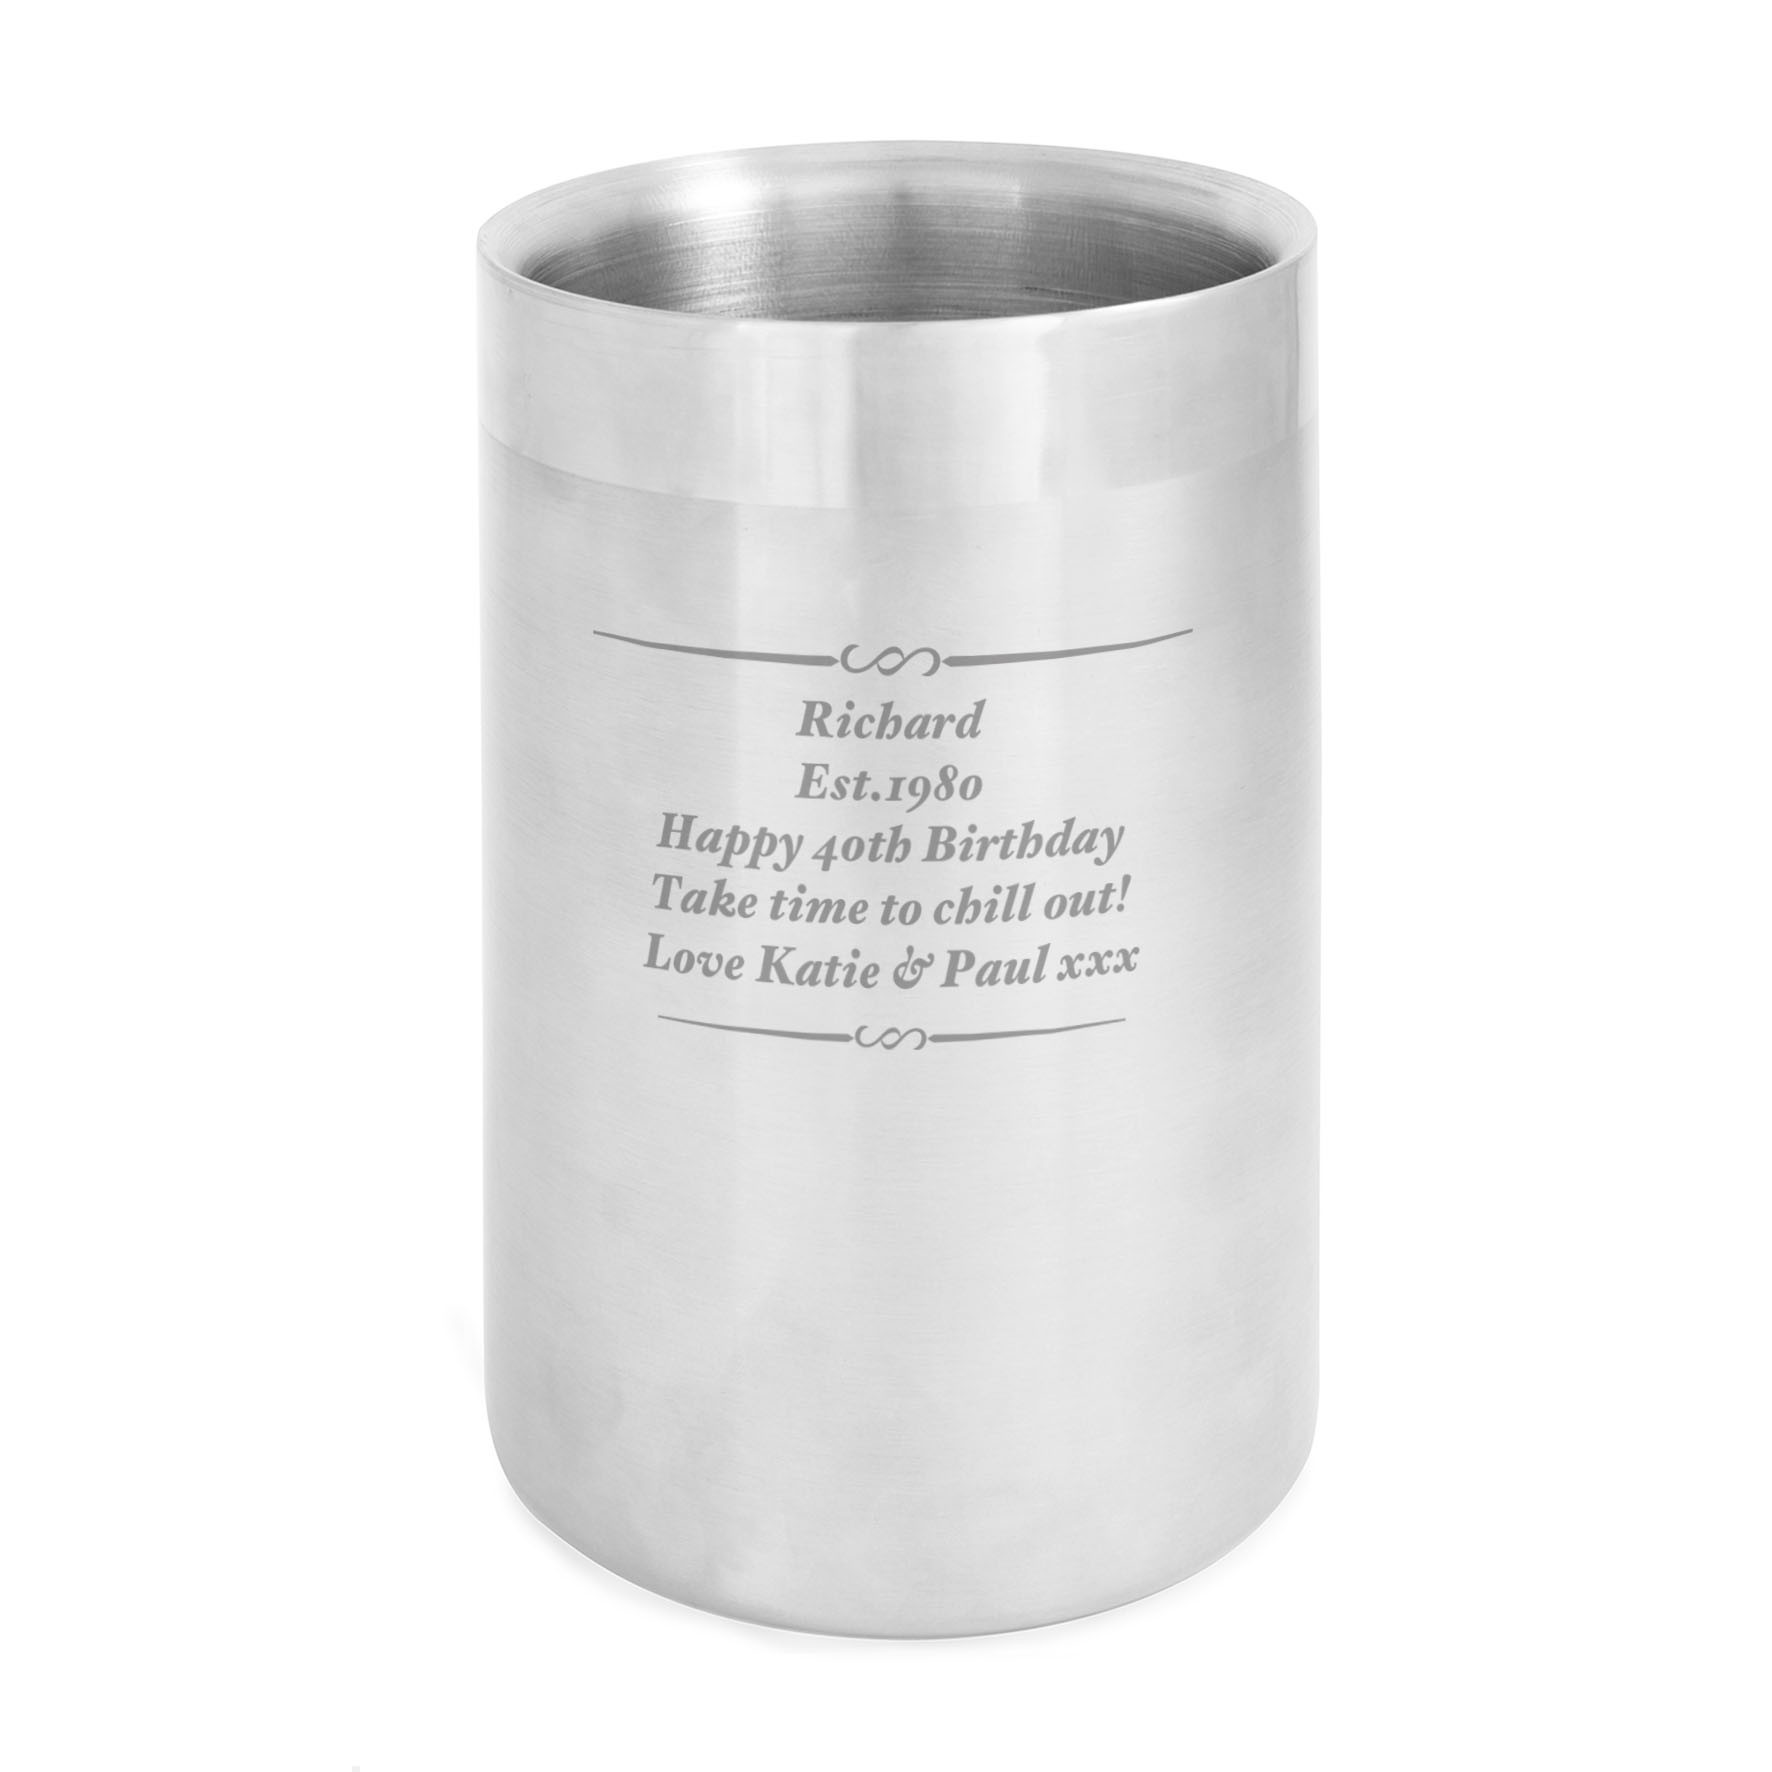 Engraved Message Stainless Steel Wine Cooler